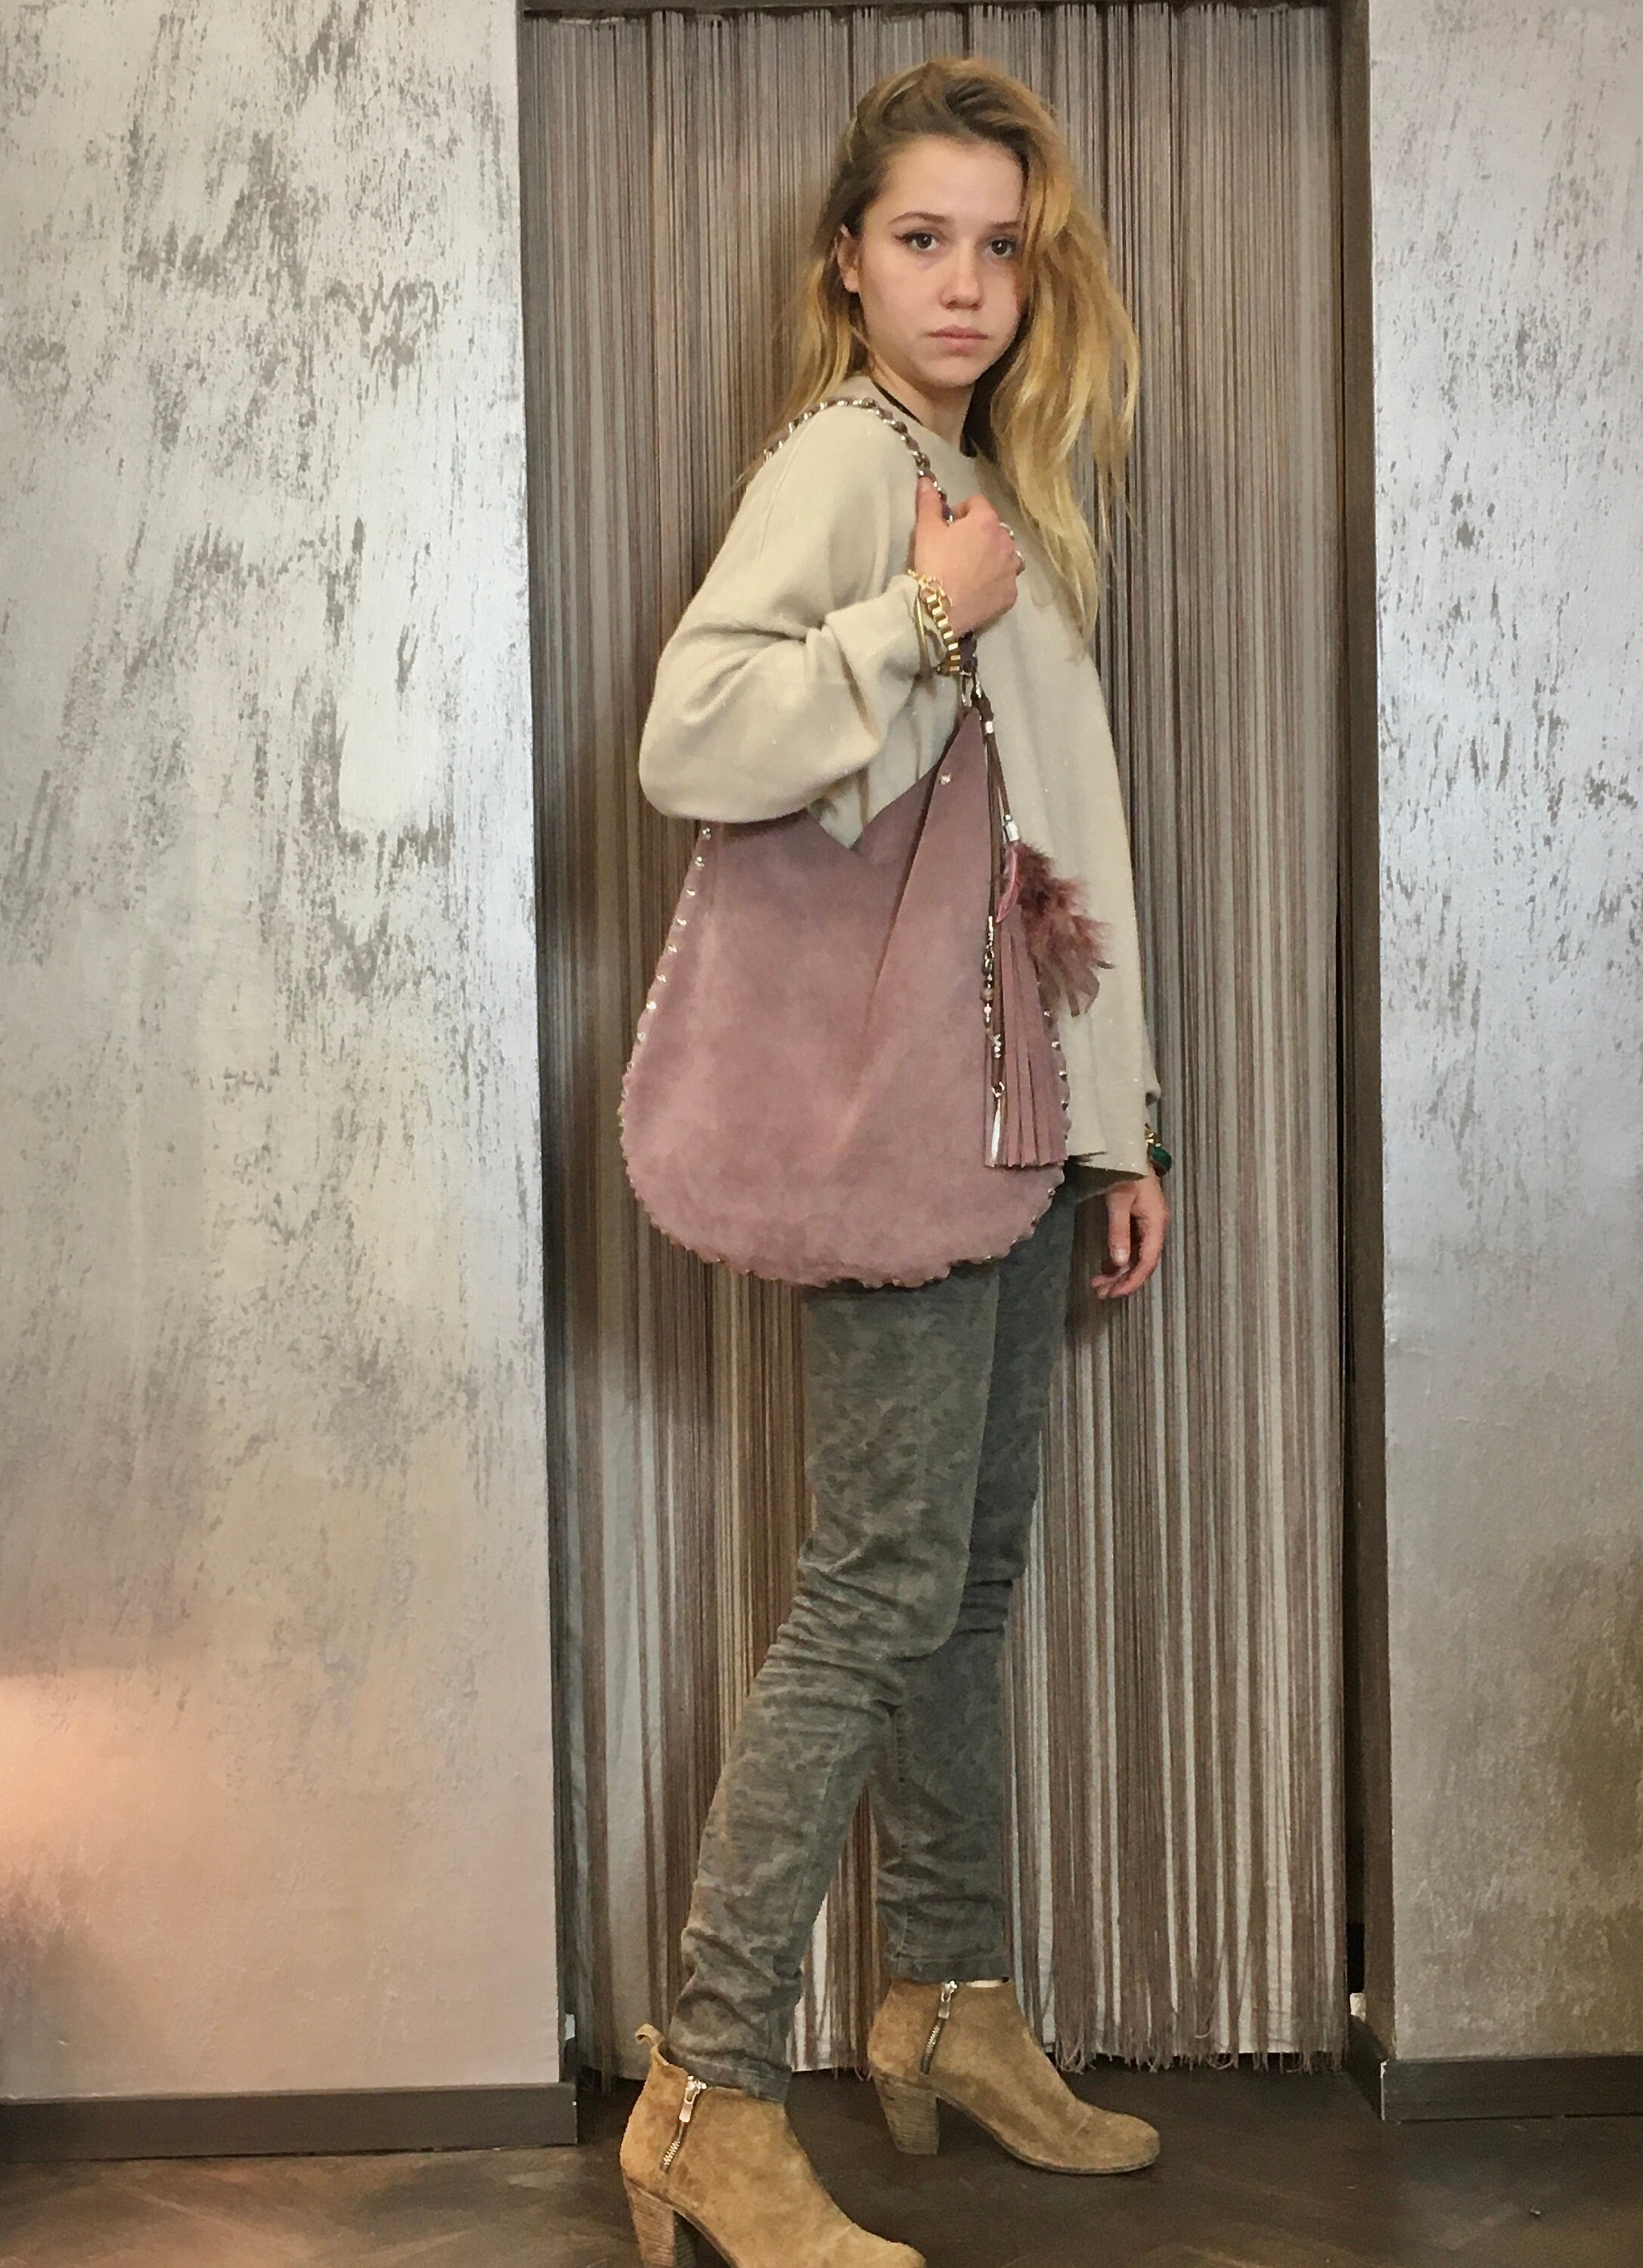 Handmade Agnes Suede Leather Tote Bag in Brown by ABURY